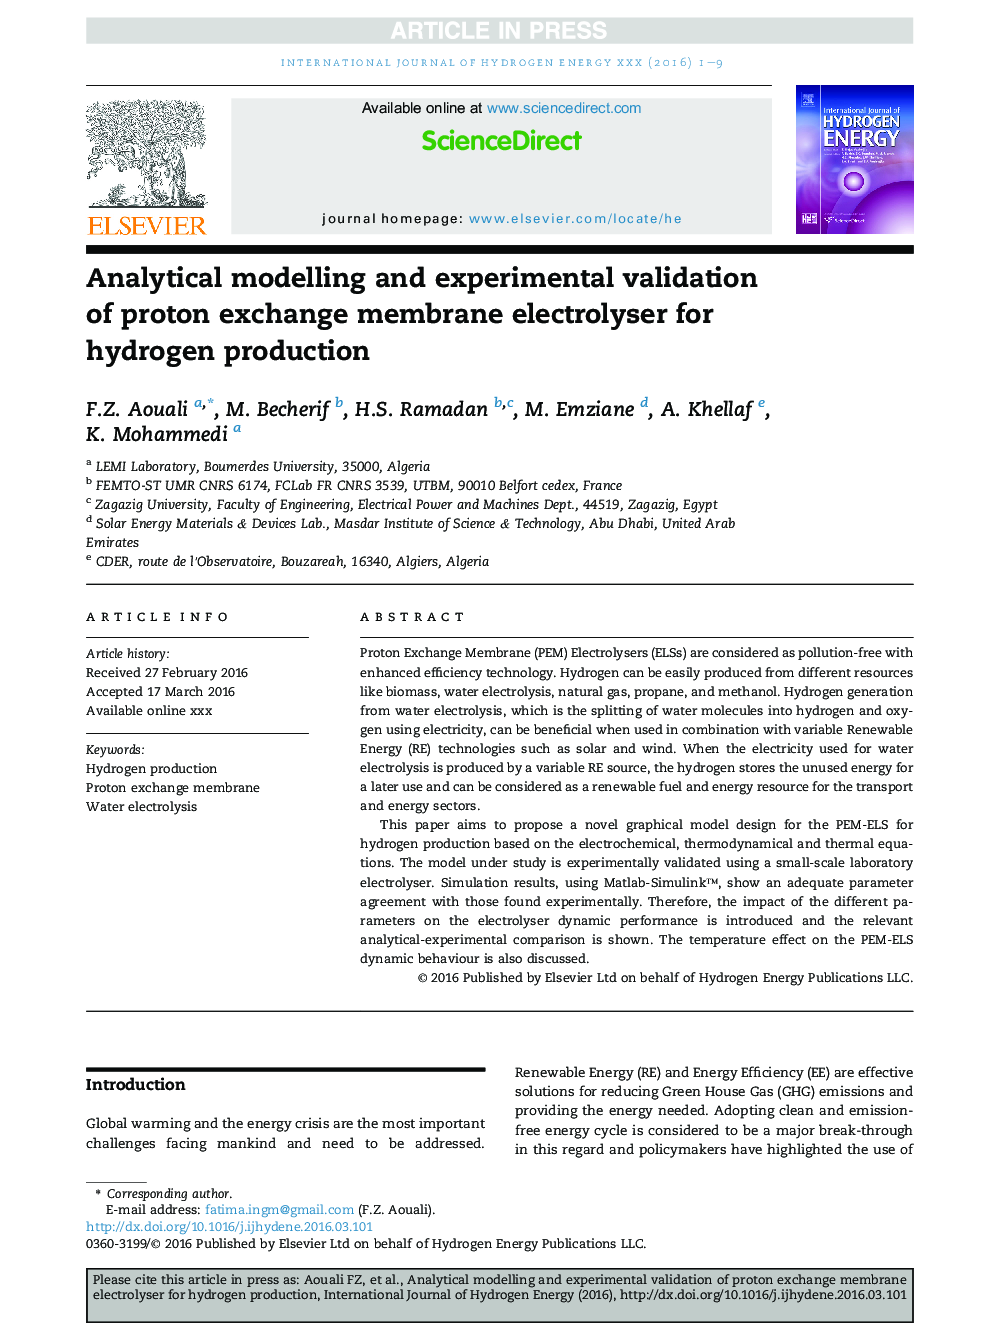 Analytical modelling and experimental validation of proton exchange membrane electrolyser for hydrogen production